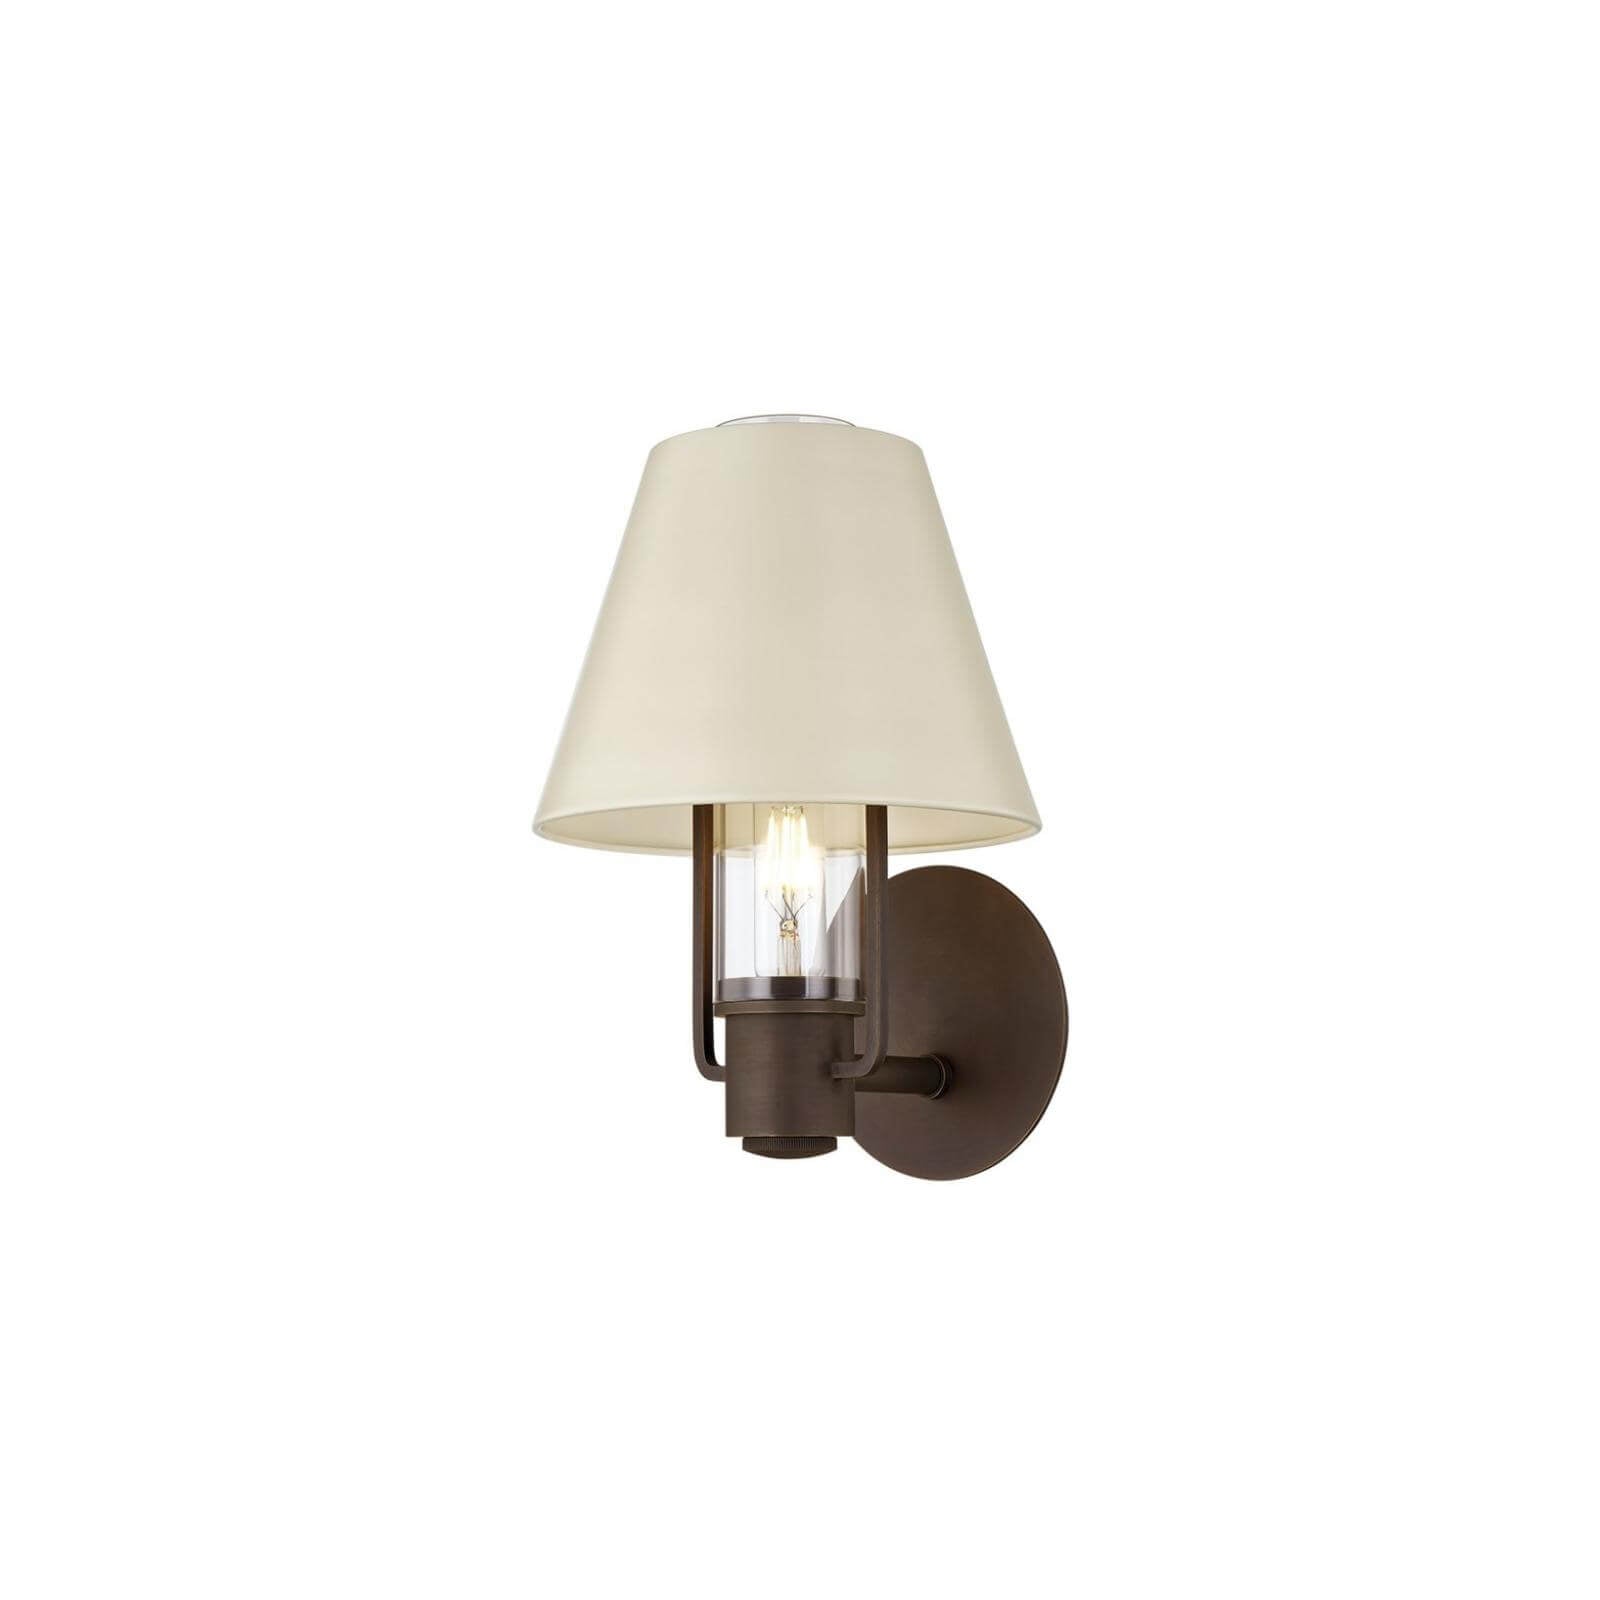 Bronze wall sconce with ivory lamp shade